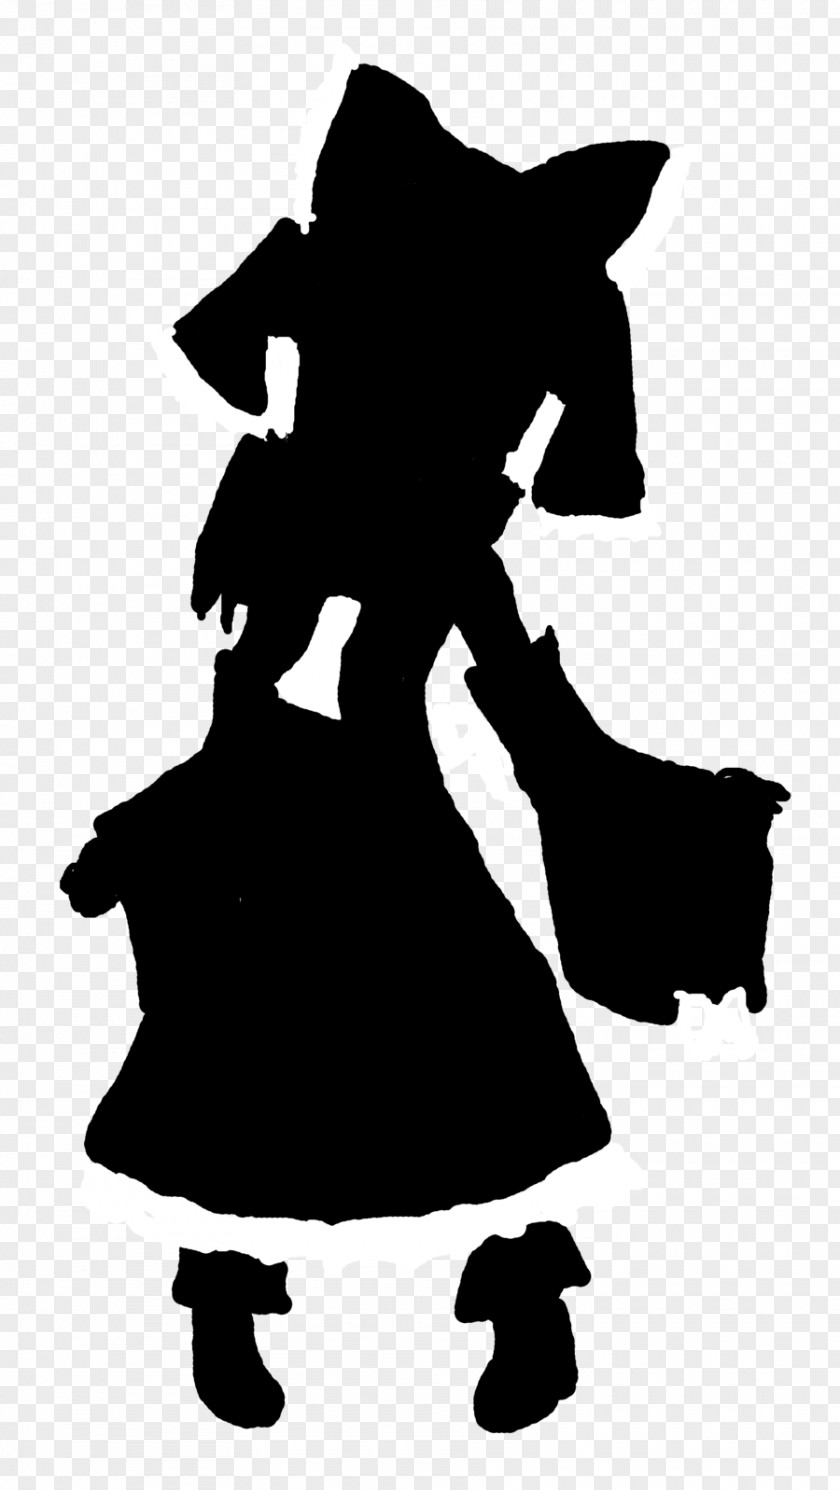 Big Ben Silhouette Character White Clip Art PNG